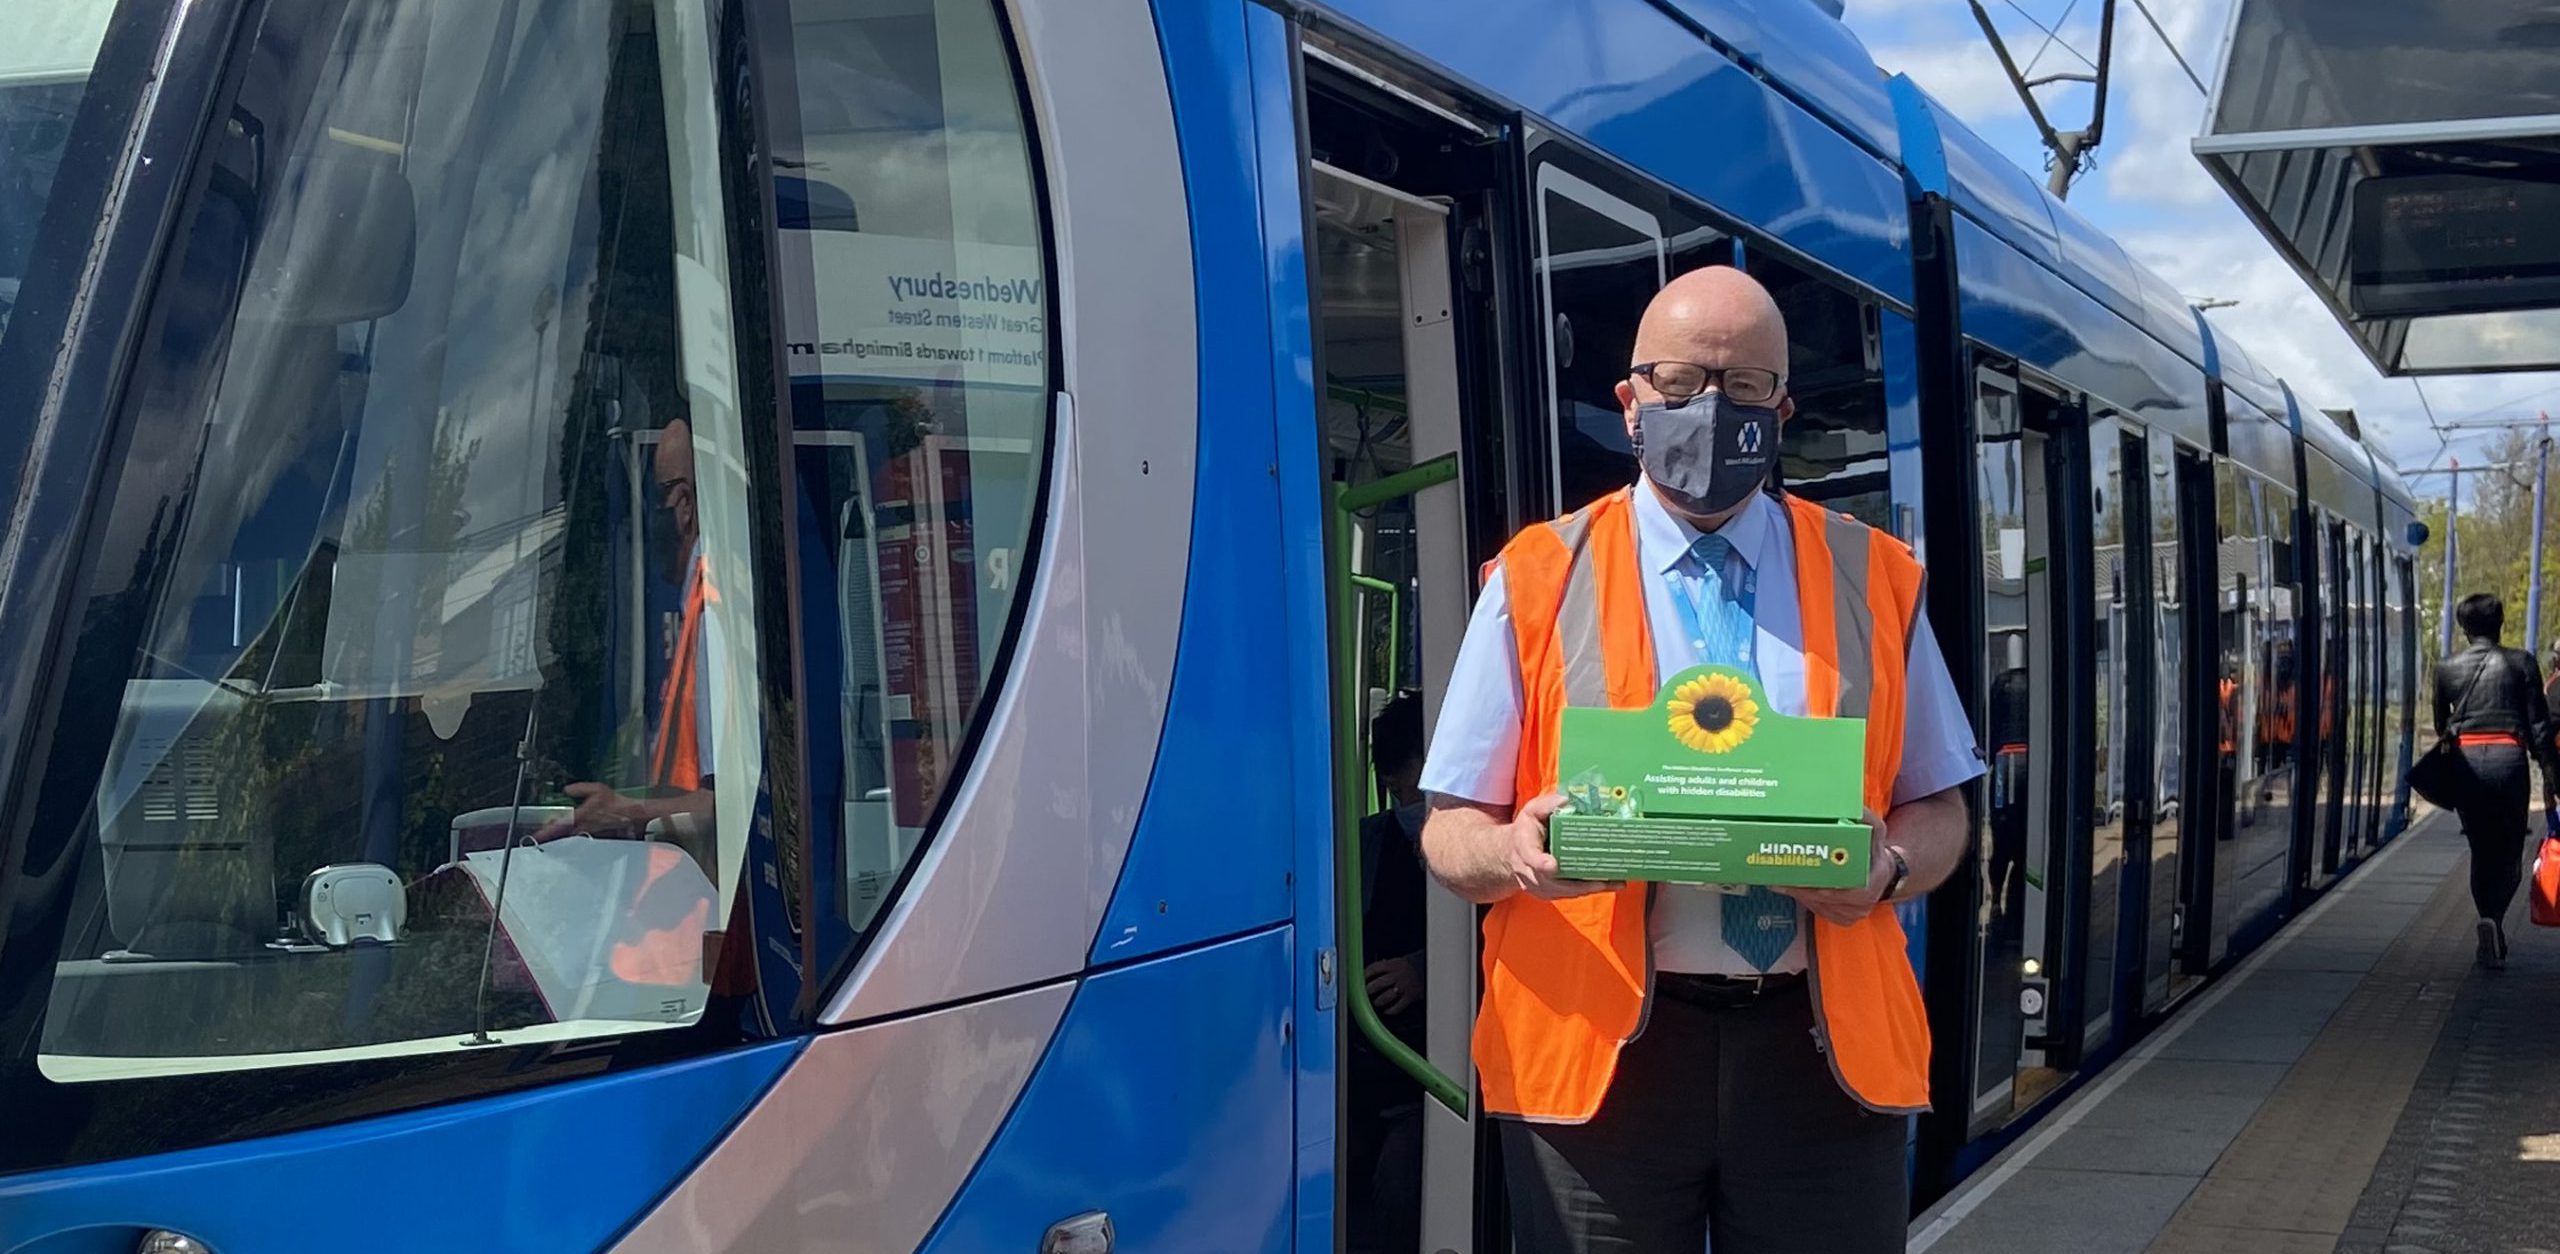 Man in front of tram wearing high vis and face mask holding sunflower charity donation box